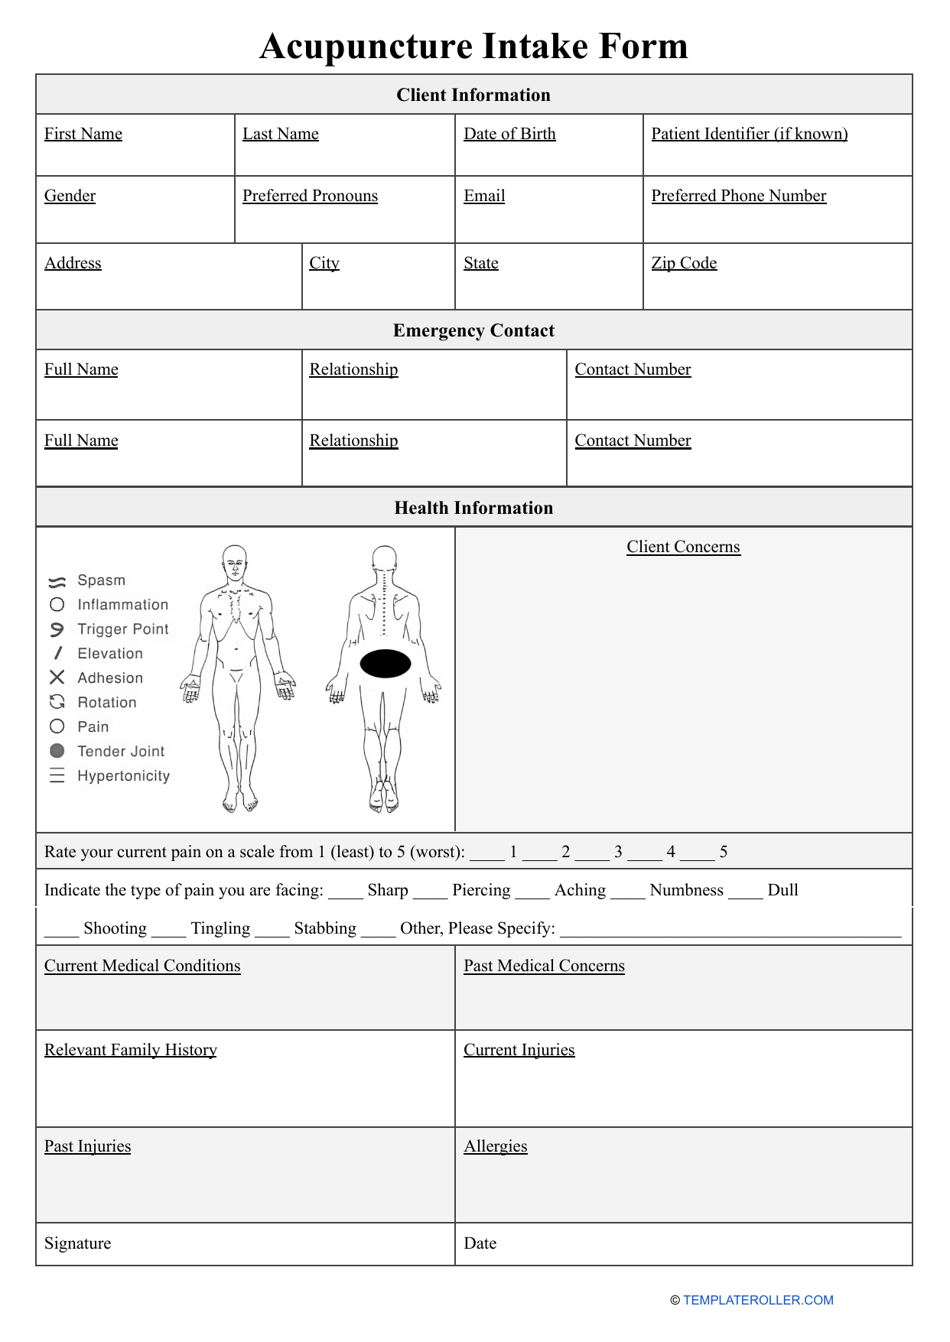 Acupuncture Intake Form - Big Table, Page 1